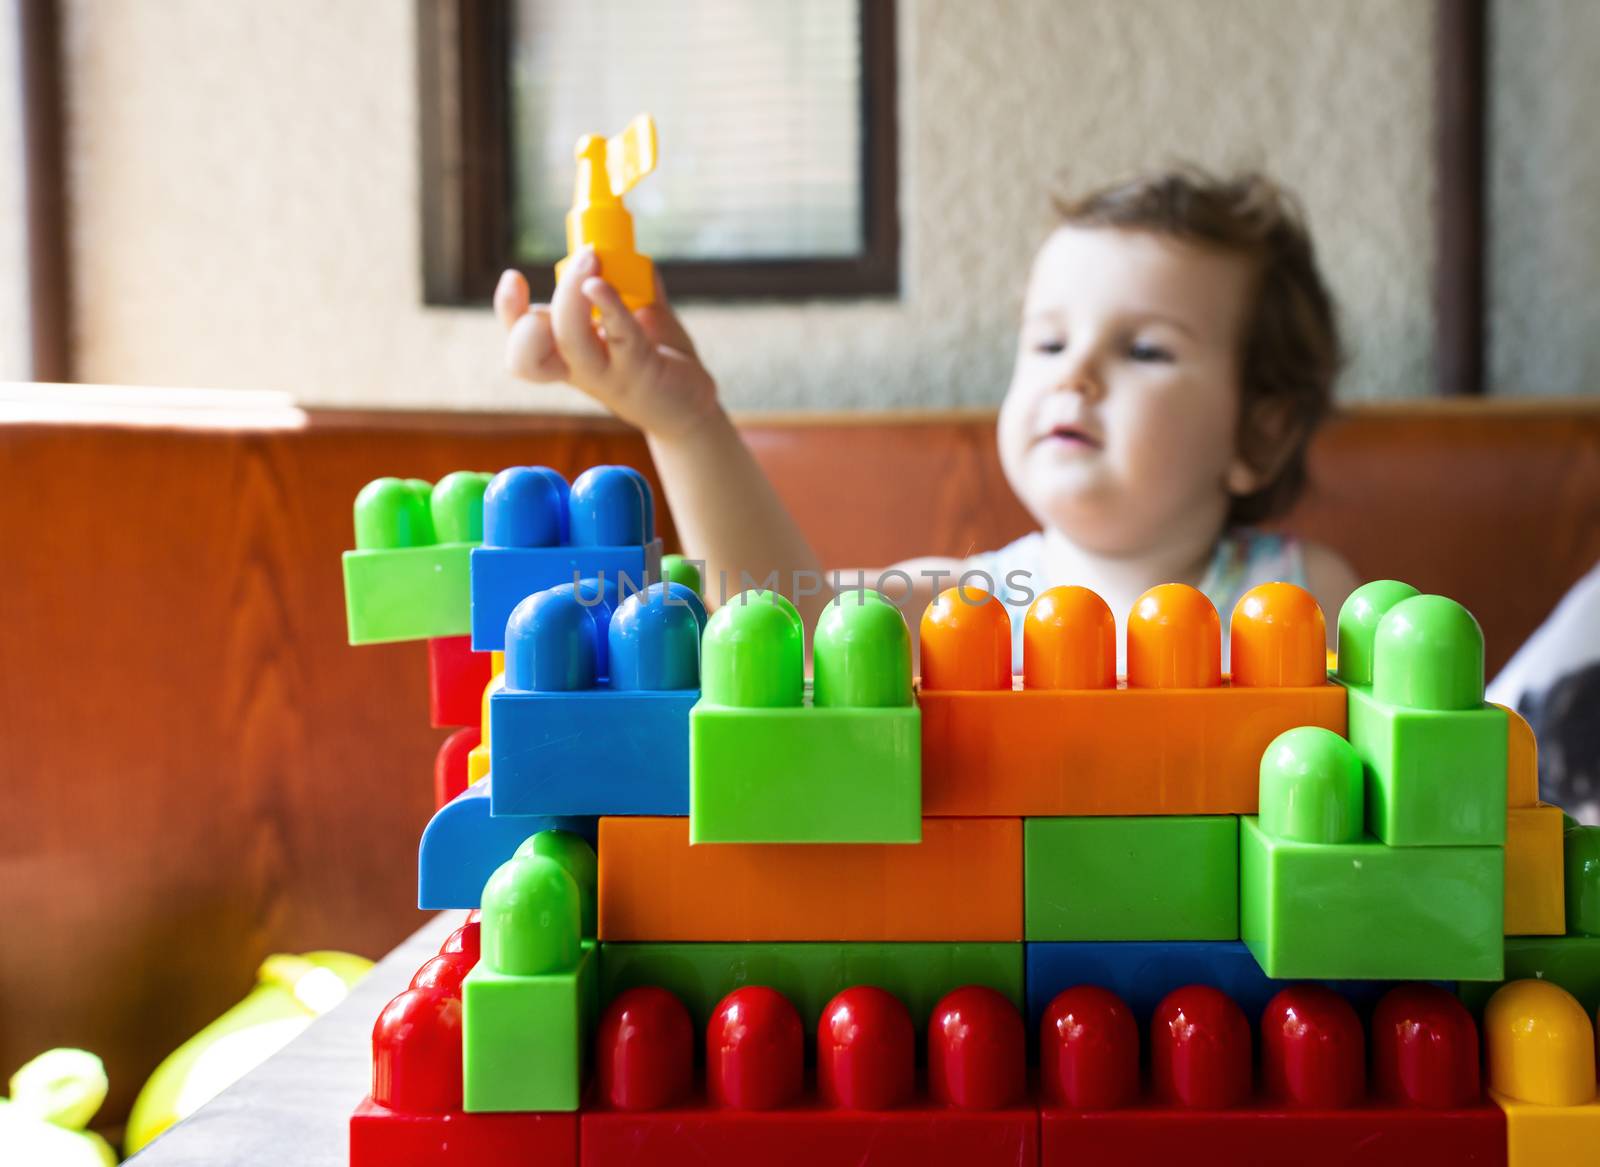 Child playing with cubes. Puts a cube